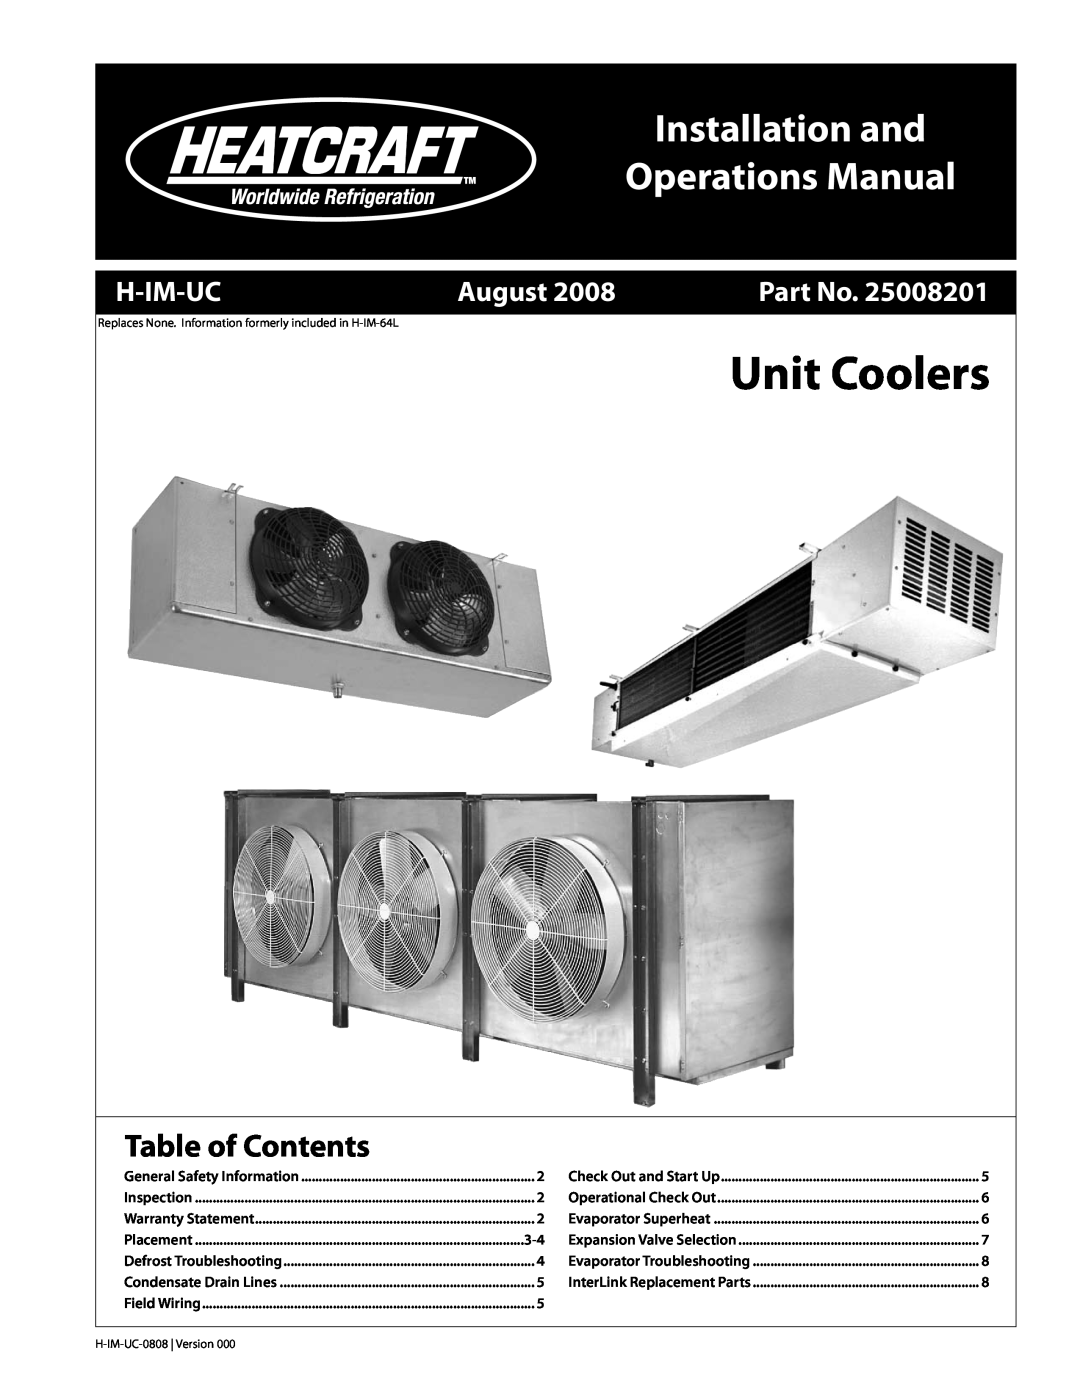 Heatcraft Refrigeration Products H-IM-UC warranty Unit Coolers, Installation and Operations Manual, Table of Contents 